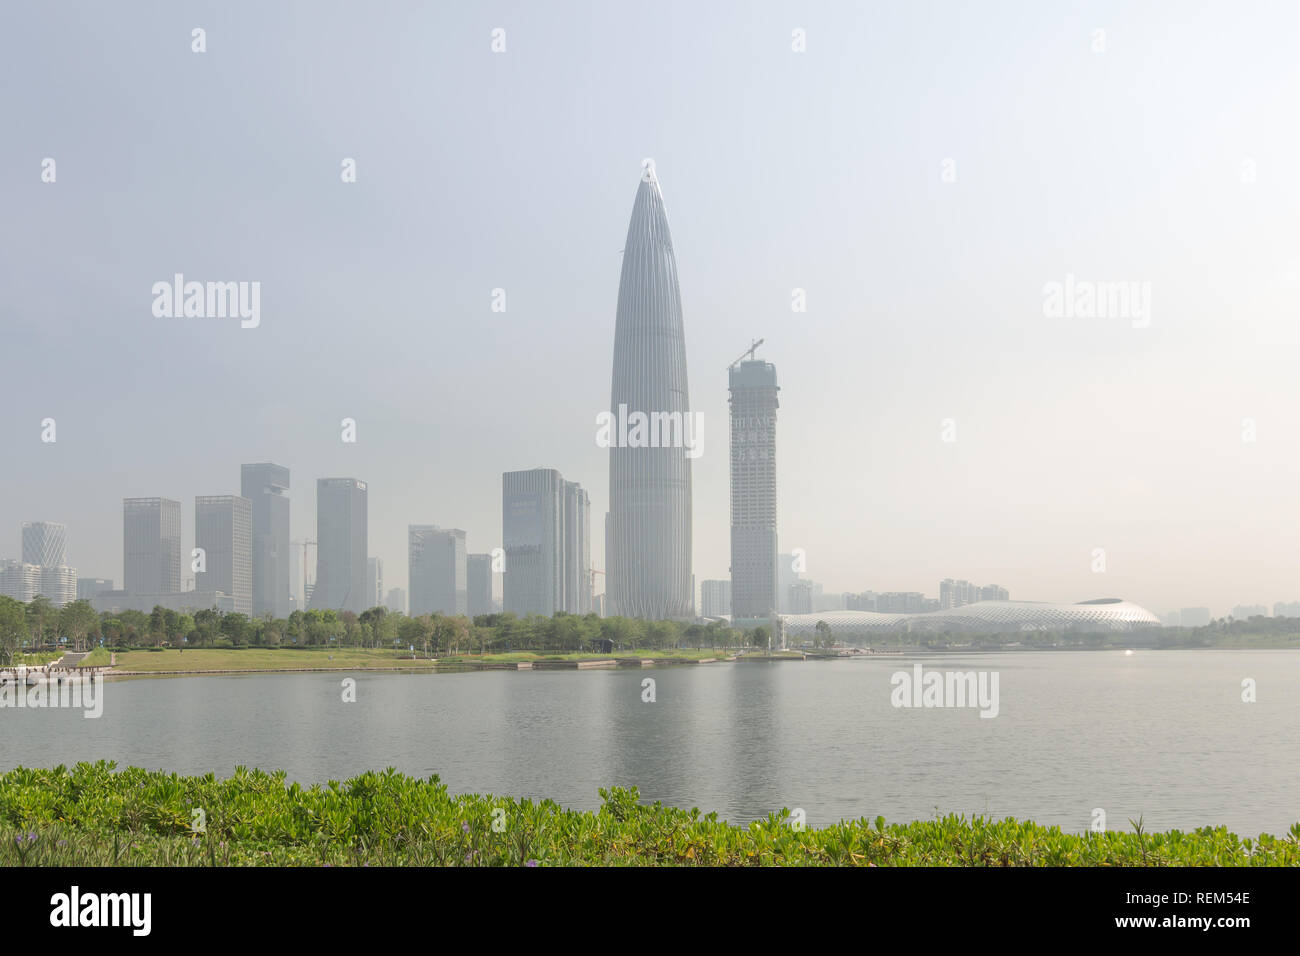 China Resources Headquarters skyscraper in Shenzhen, also known as 华润总部大厦 Stock Photo